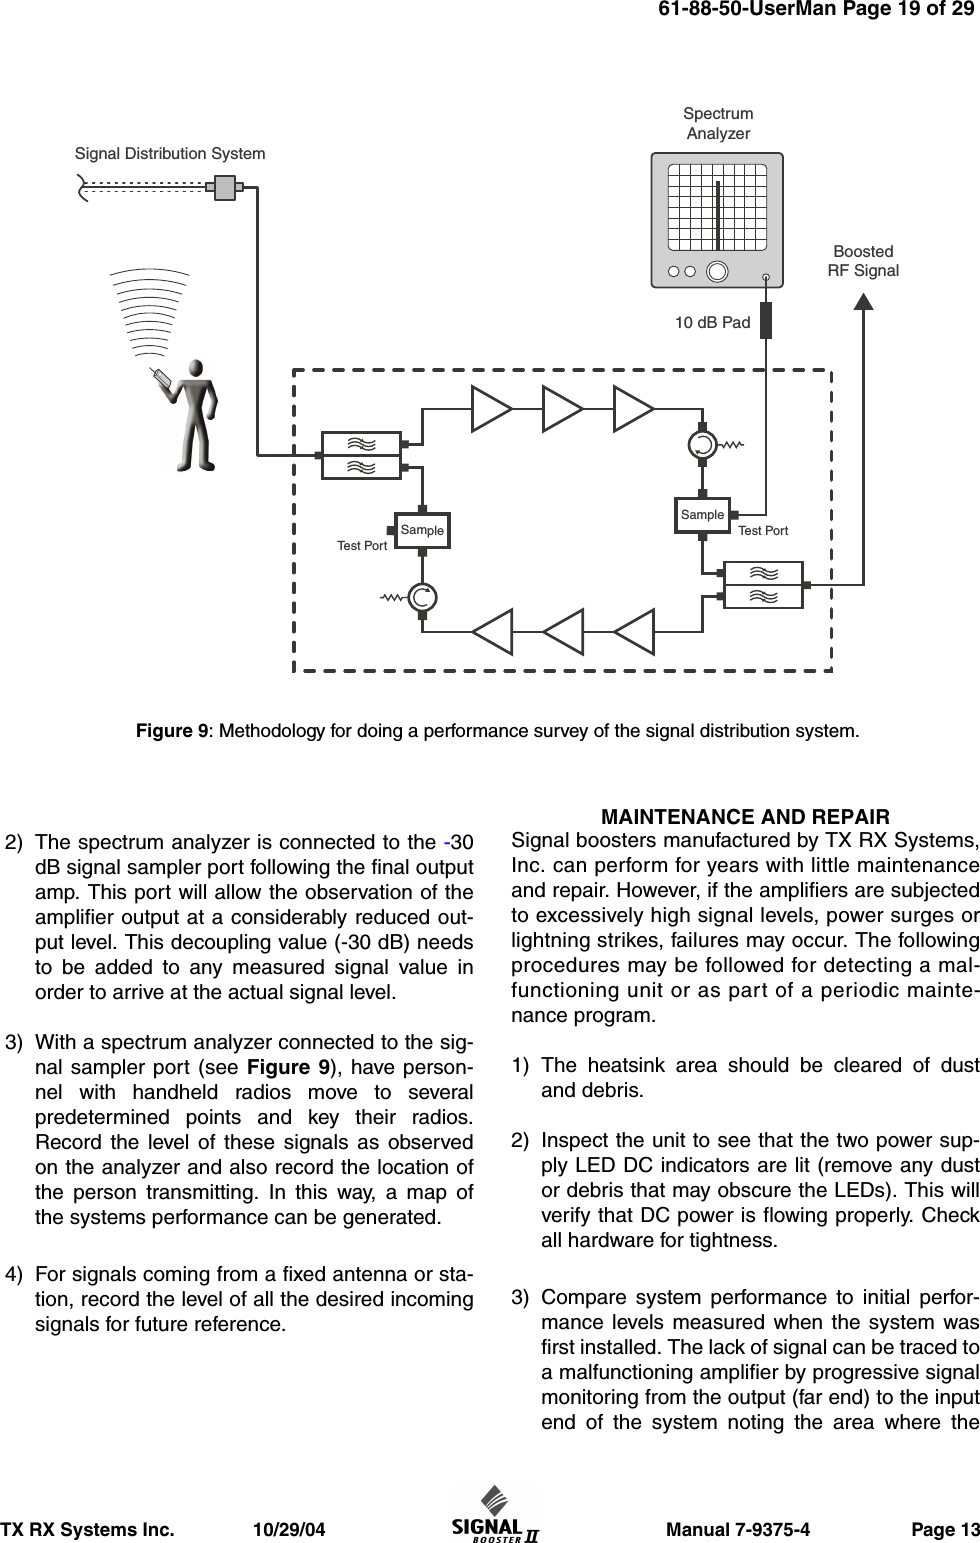                       Manual 7-9375-4                    Page 13TX RX Systems Inc.               10/29/042) The spectrum analyzer is connected to the -30dB signal sampler port following the final outputamp. This port will allow the observation of theamplifier output at a considerably reduced out-put level. This decoupling value (-30 dB) needsto be added to any measured signal value inorder to arrive at the actual signal level.3) With a spectrum analyzer connected to the sig-nal sampler port (see Figure 9), have person-nel with handheld radios move to severalpredetermined points and key their radios.Record the level of these signals as observedon the analyzer and also record the location ofthe person transmitting. In this way, a map ofthe systems performance can be generated.4) For signals coming from a fixed antenna or sta-tion, record the level of all the desired incomingsignals for future reference.MAINTENANCE AND REPAIRSignal boosters manufactured by TX RX Systems,Inc. can perform for years with little maintenanceand repair. However, if the amplifiers are subjectedto excessively high signal levels, power surges orlightning strikes, failures may occur. The followingprocedures may be followed for detecting a mal-functioning unit or as part of a periodic mainte-nance program.1) The heatsink area should be cleared of dustand debris.2) Inspect the unit to see that the two power sup-ply LED DC indicators are lit (remove any dustor debris that may obscure the LEDs). This willverify that DC power is flowing properly. Checkall hardware for tightness.3) Compare system performance to initial perfor-mance levels measured when the system wasfirst installed. The lack of signal can be traced toa malfunctioning amplifier by progressive signalmonitoring from the output (far end) to the inputend of the system noting the area where theBoostedRF SignalSignal Distribution SystemSpectrumAnalyzer10 dB PadSampleSampleTest PortTest PortFigure 9: Methodology for doing a performance survey of the signal distribution system. 61-88-50-UserMan Page 19 of 29